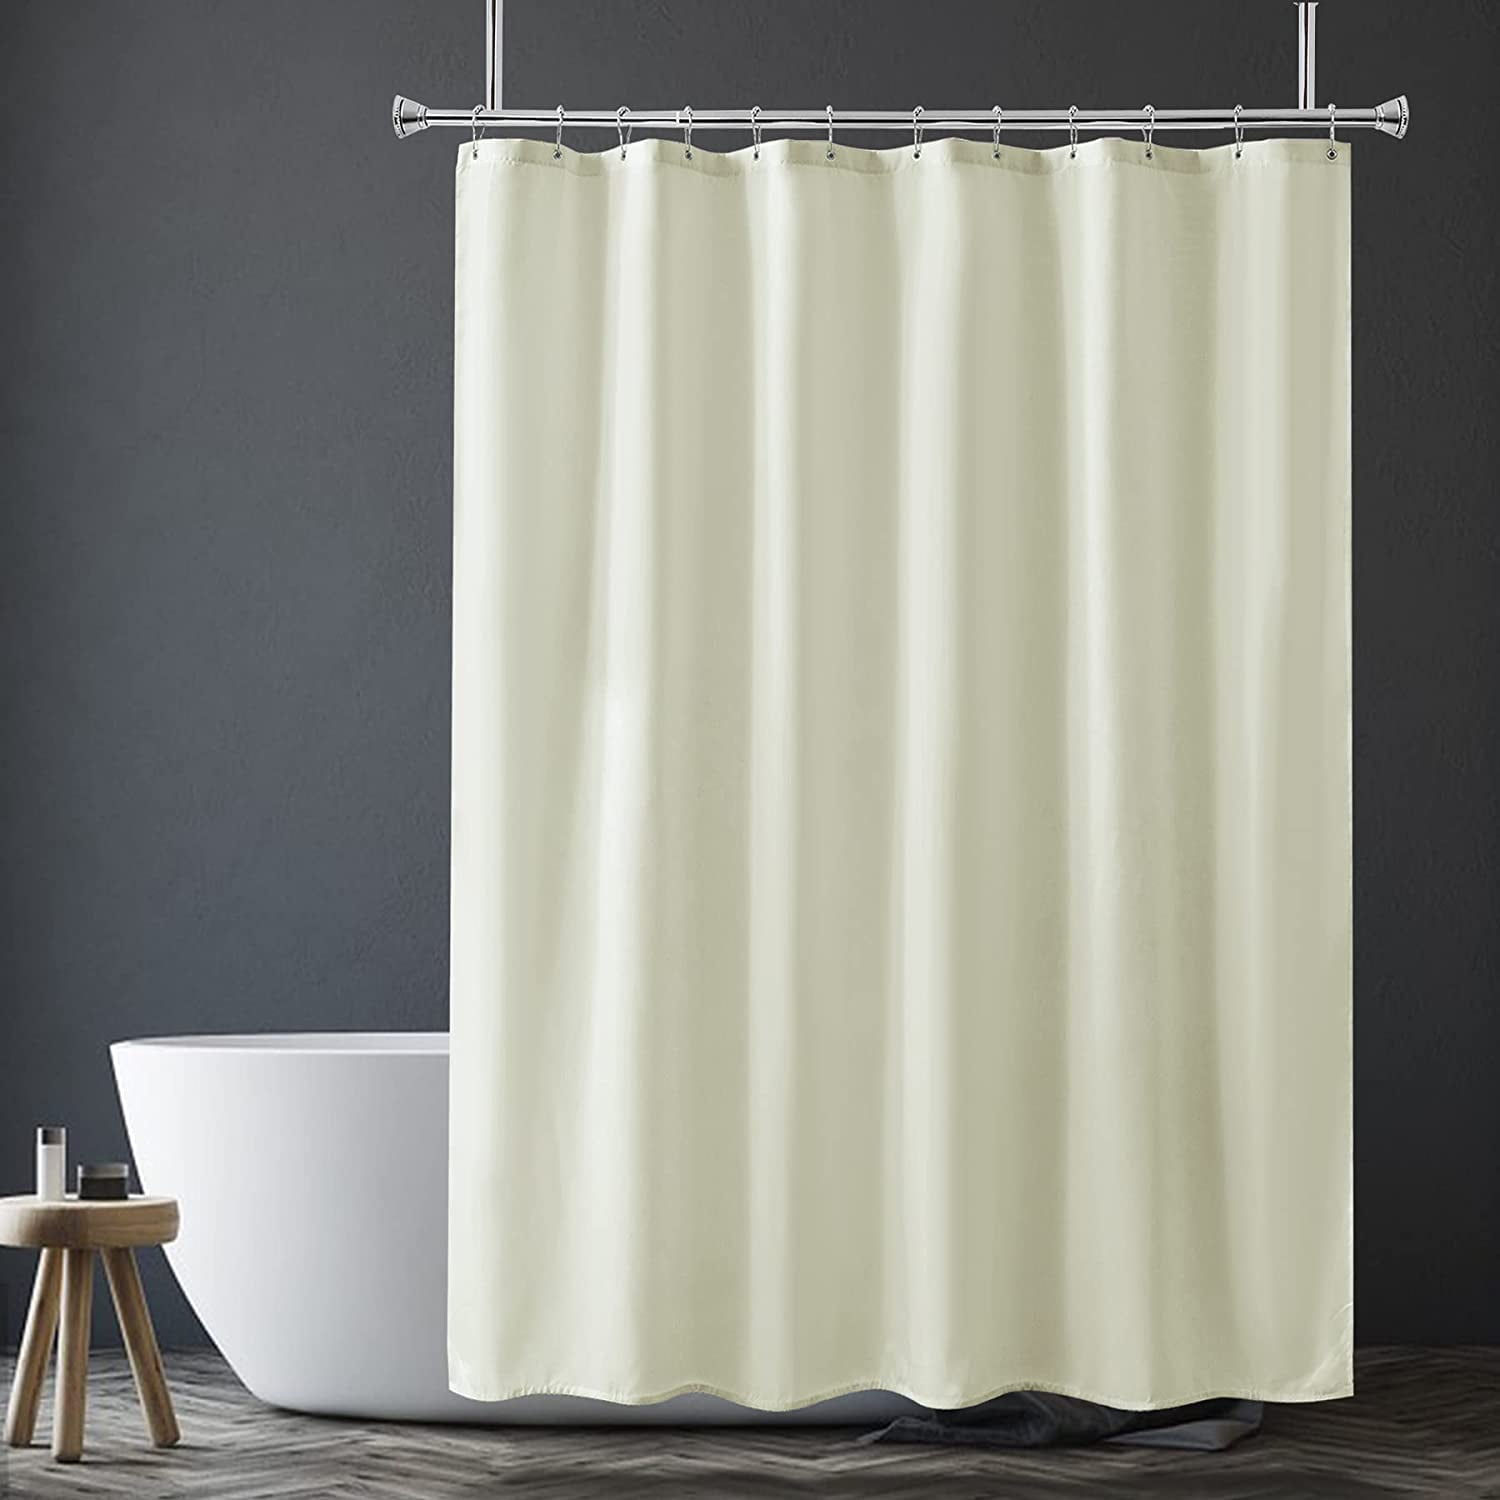 Extra Long Shower Curtain Waterproof Polyester Fabric Bathroom Shower Curtains 